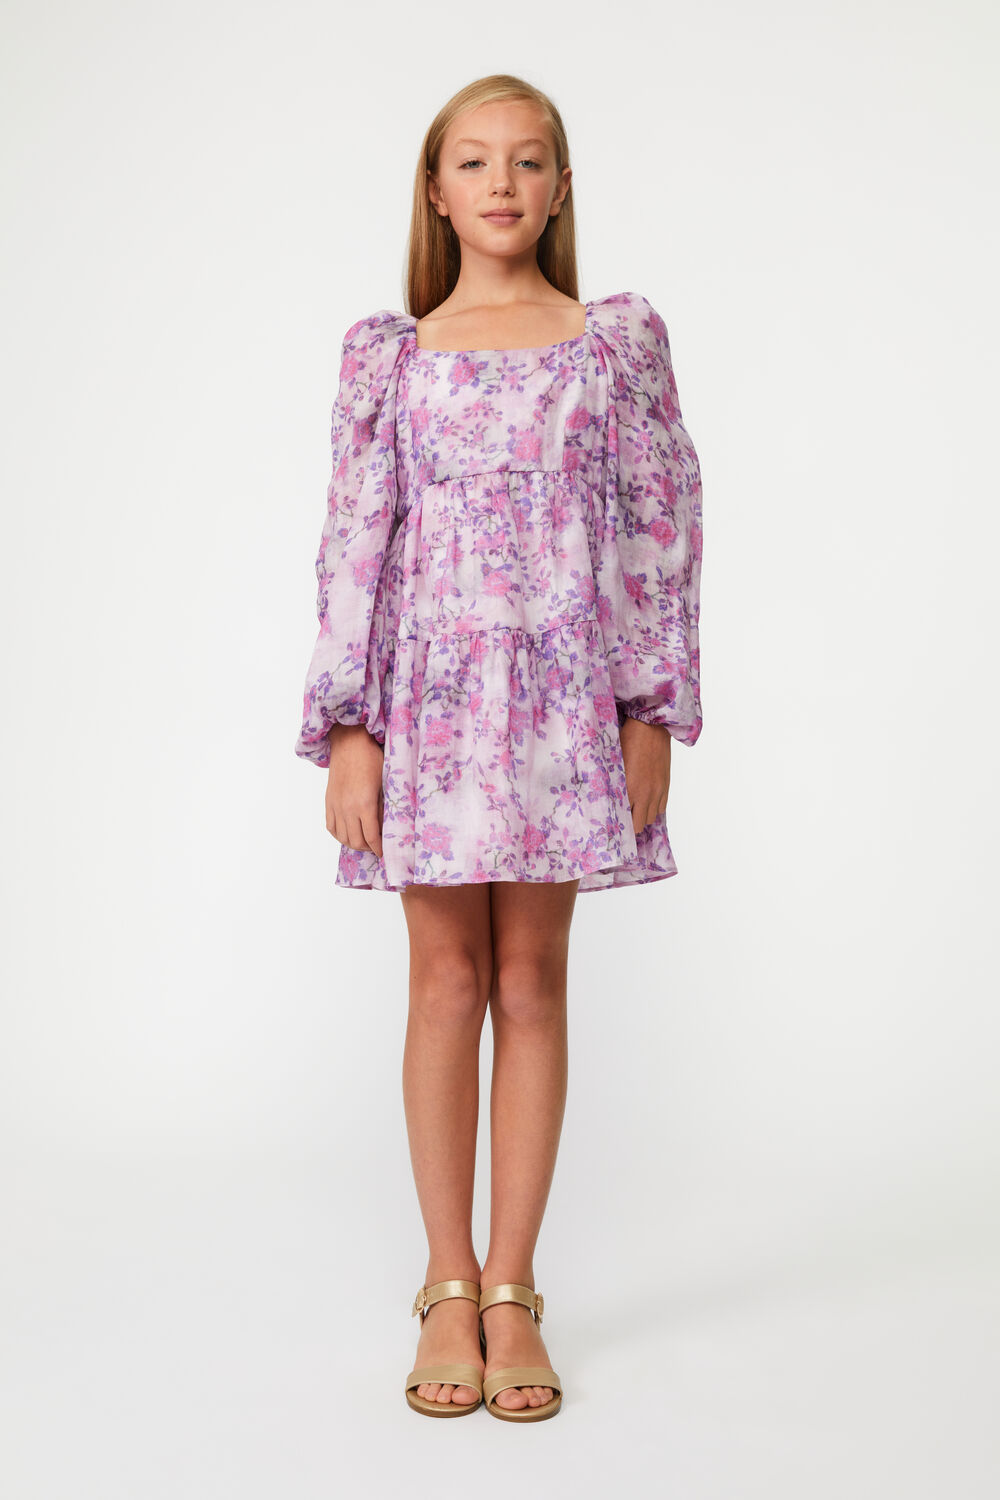 Girls AUDREY FLORAL DRESS in colour METEORITE